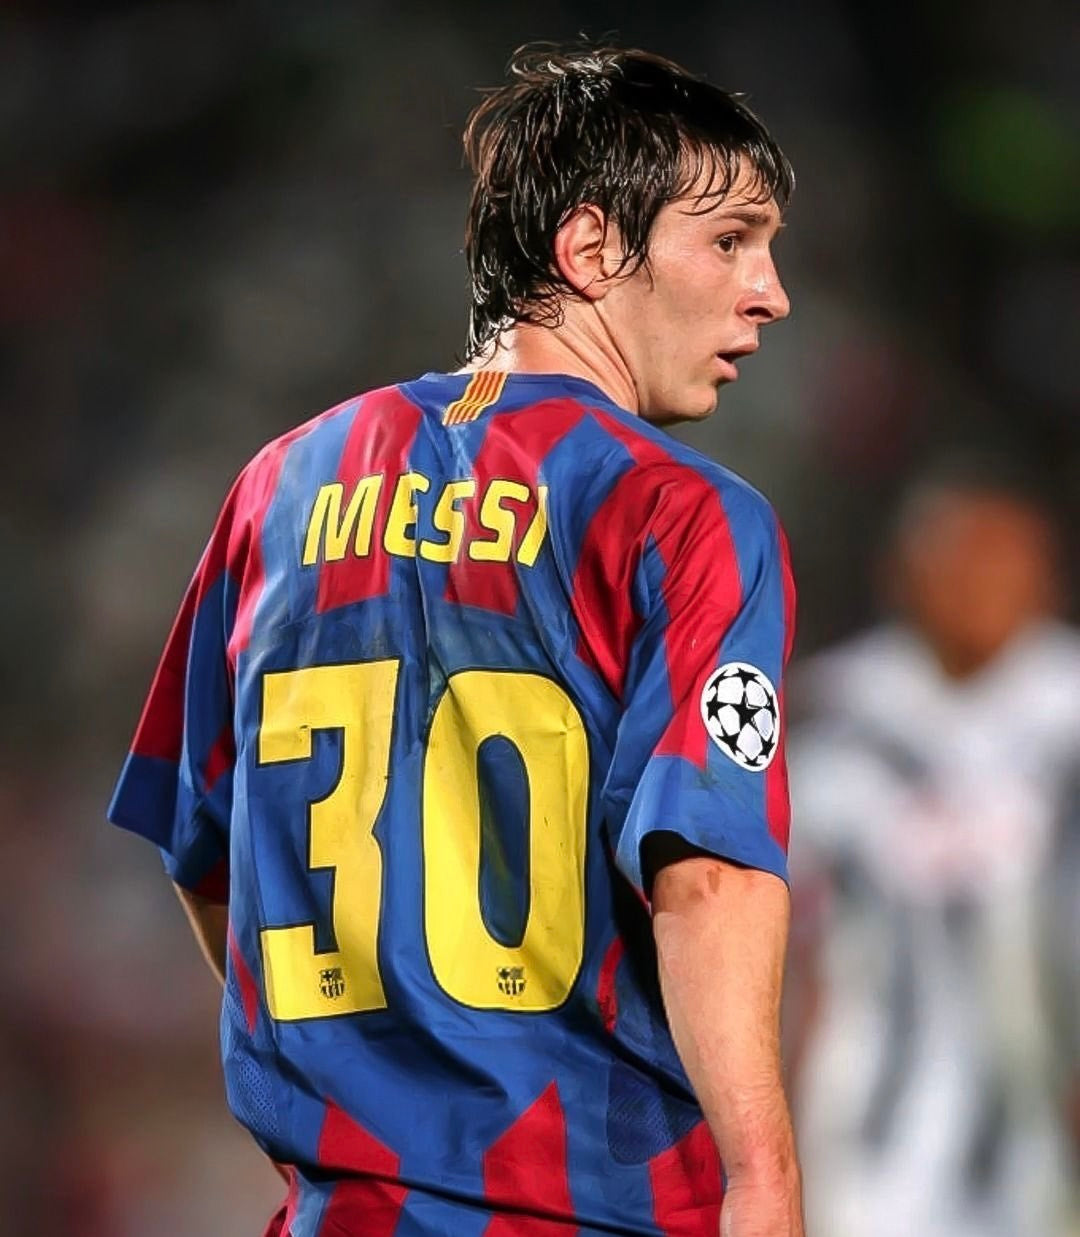 Lionel Messi FC Barcelona #30 2005/06 UEFA Champions League Final Authentic Nike Iconic Classic Retro Jersey - Blue & Red